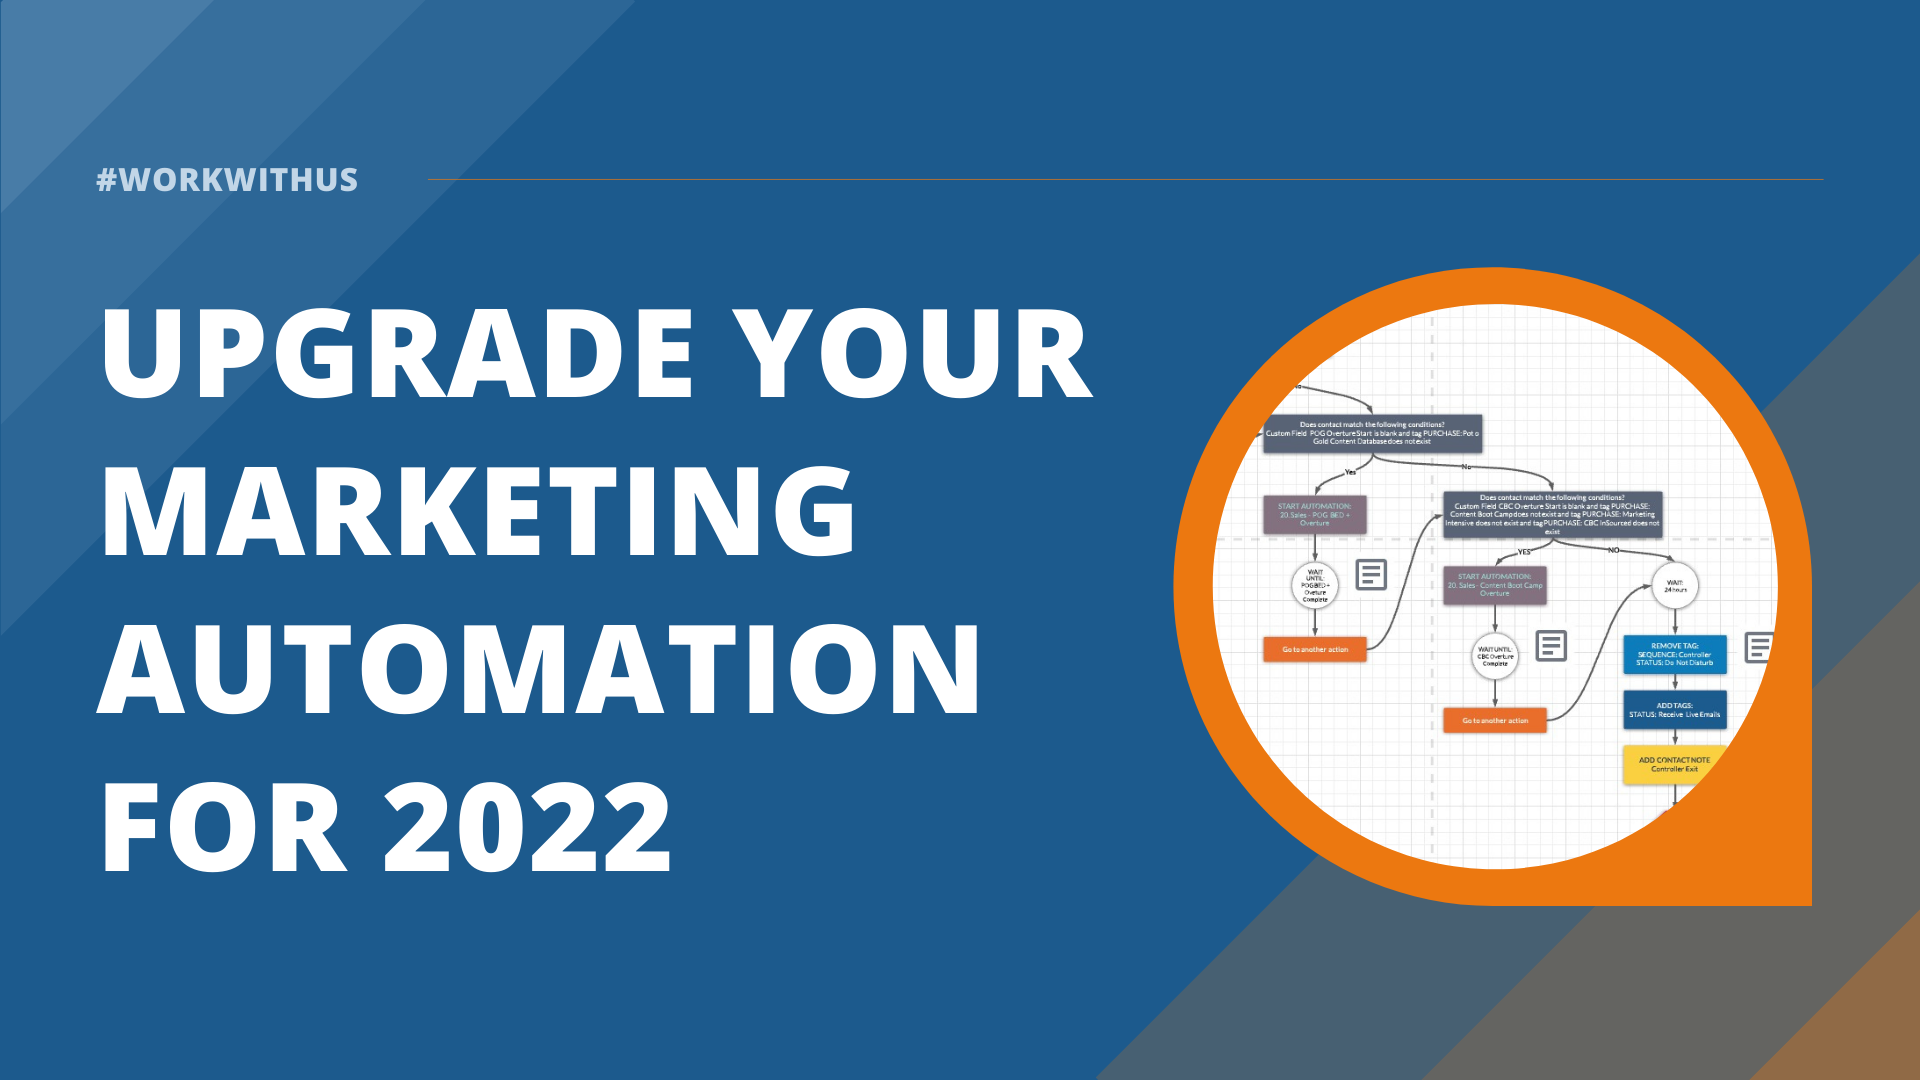 Upgrade your marketing automation in 2022